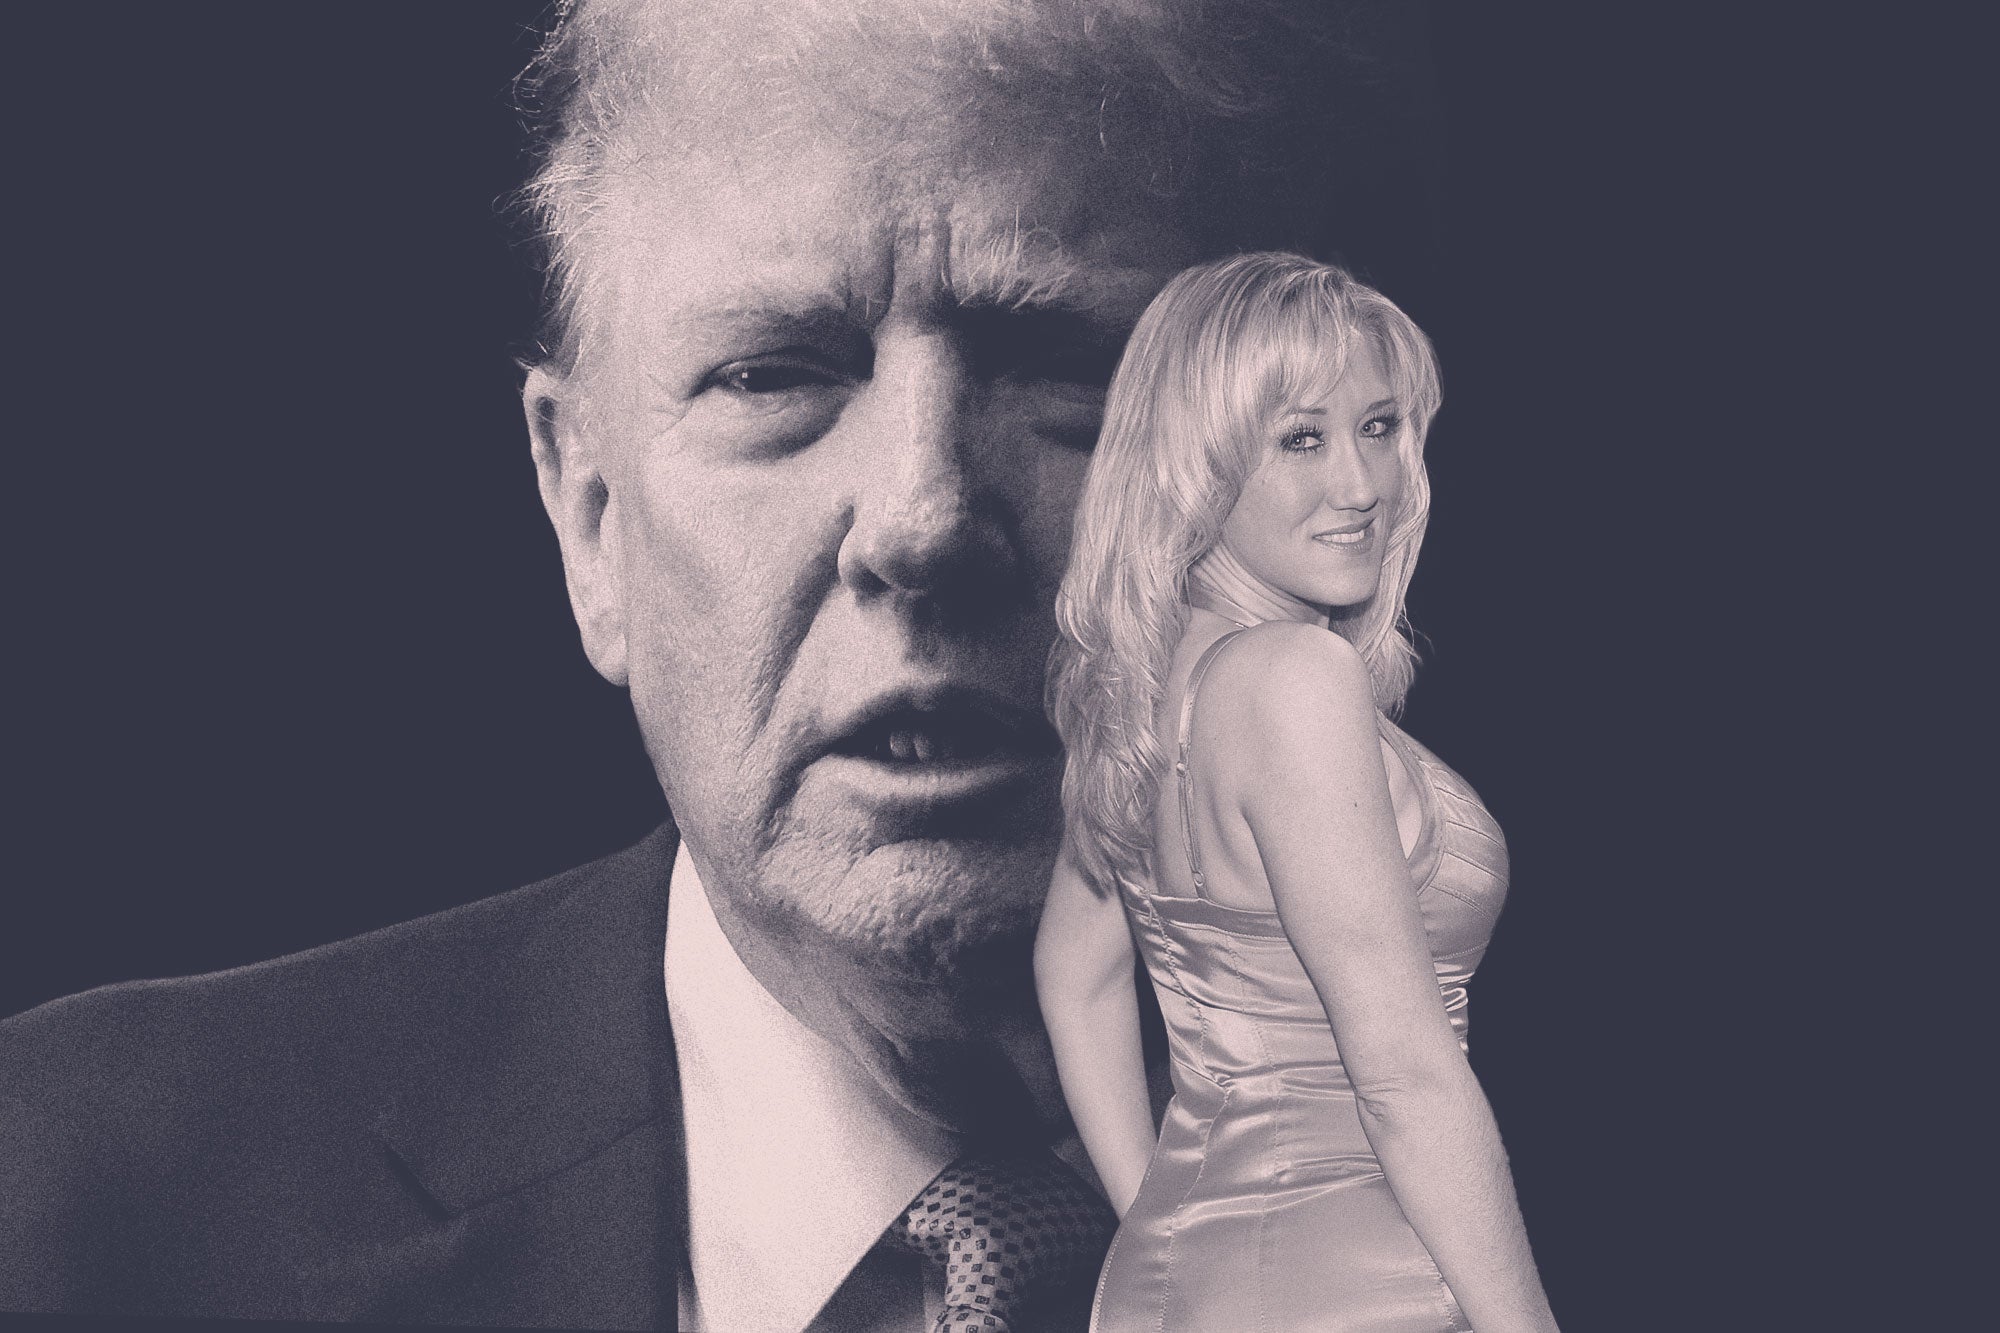 Alana Evans in an evening dress is superimposed over a giant Trump face.